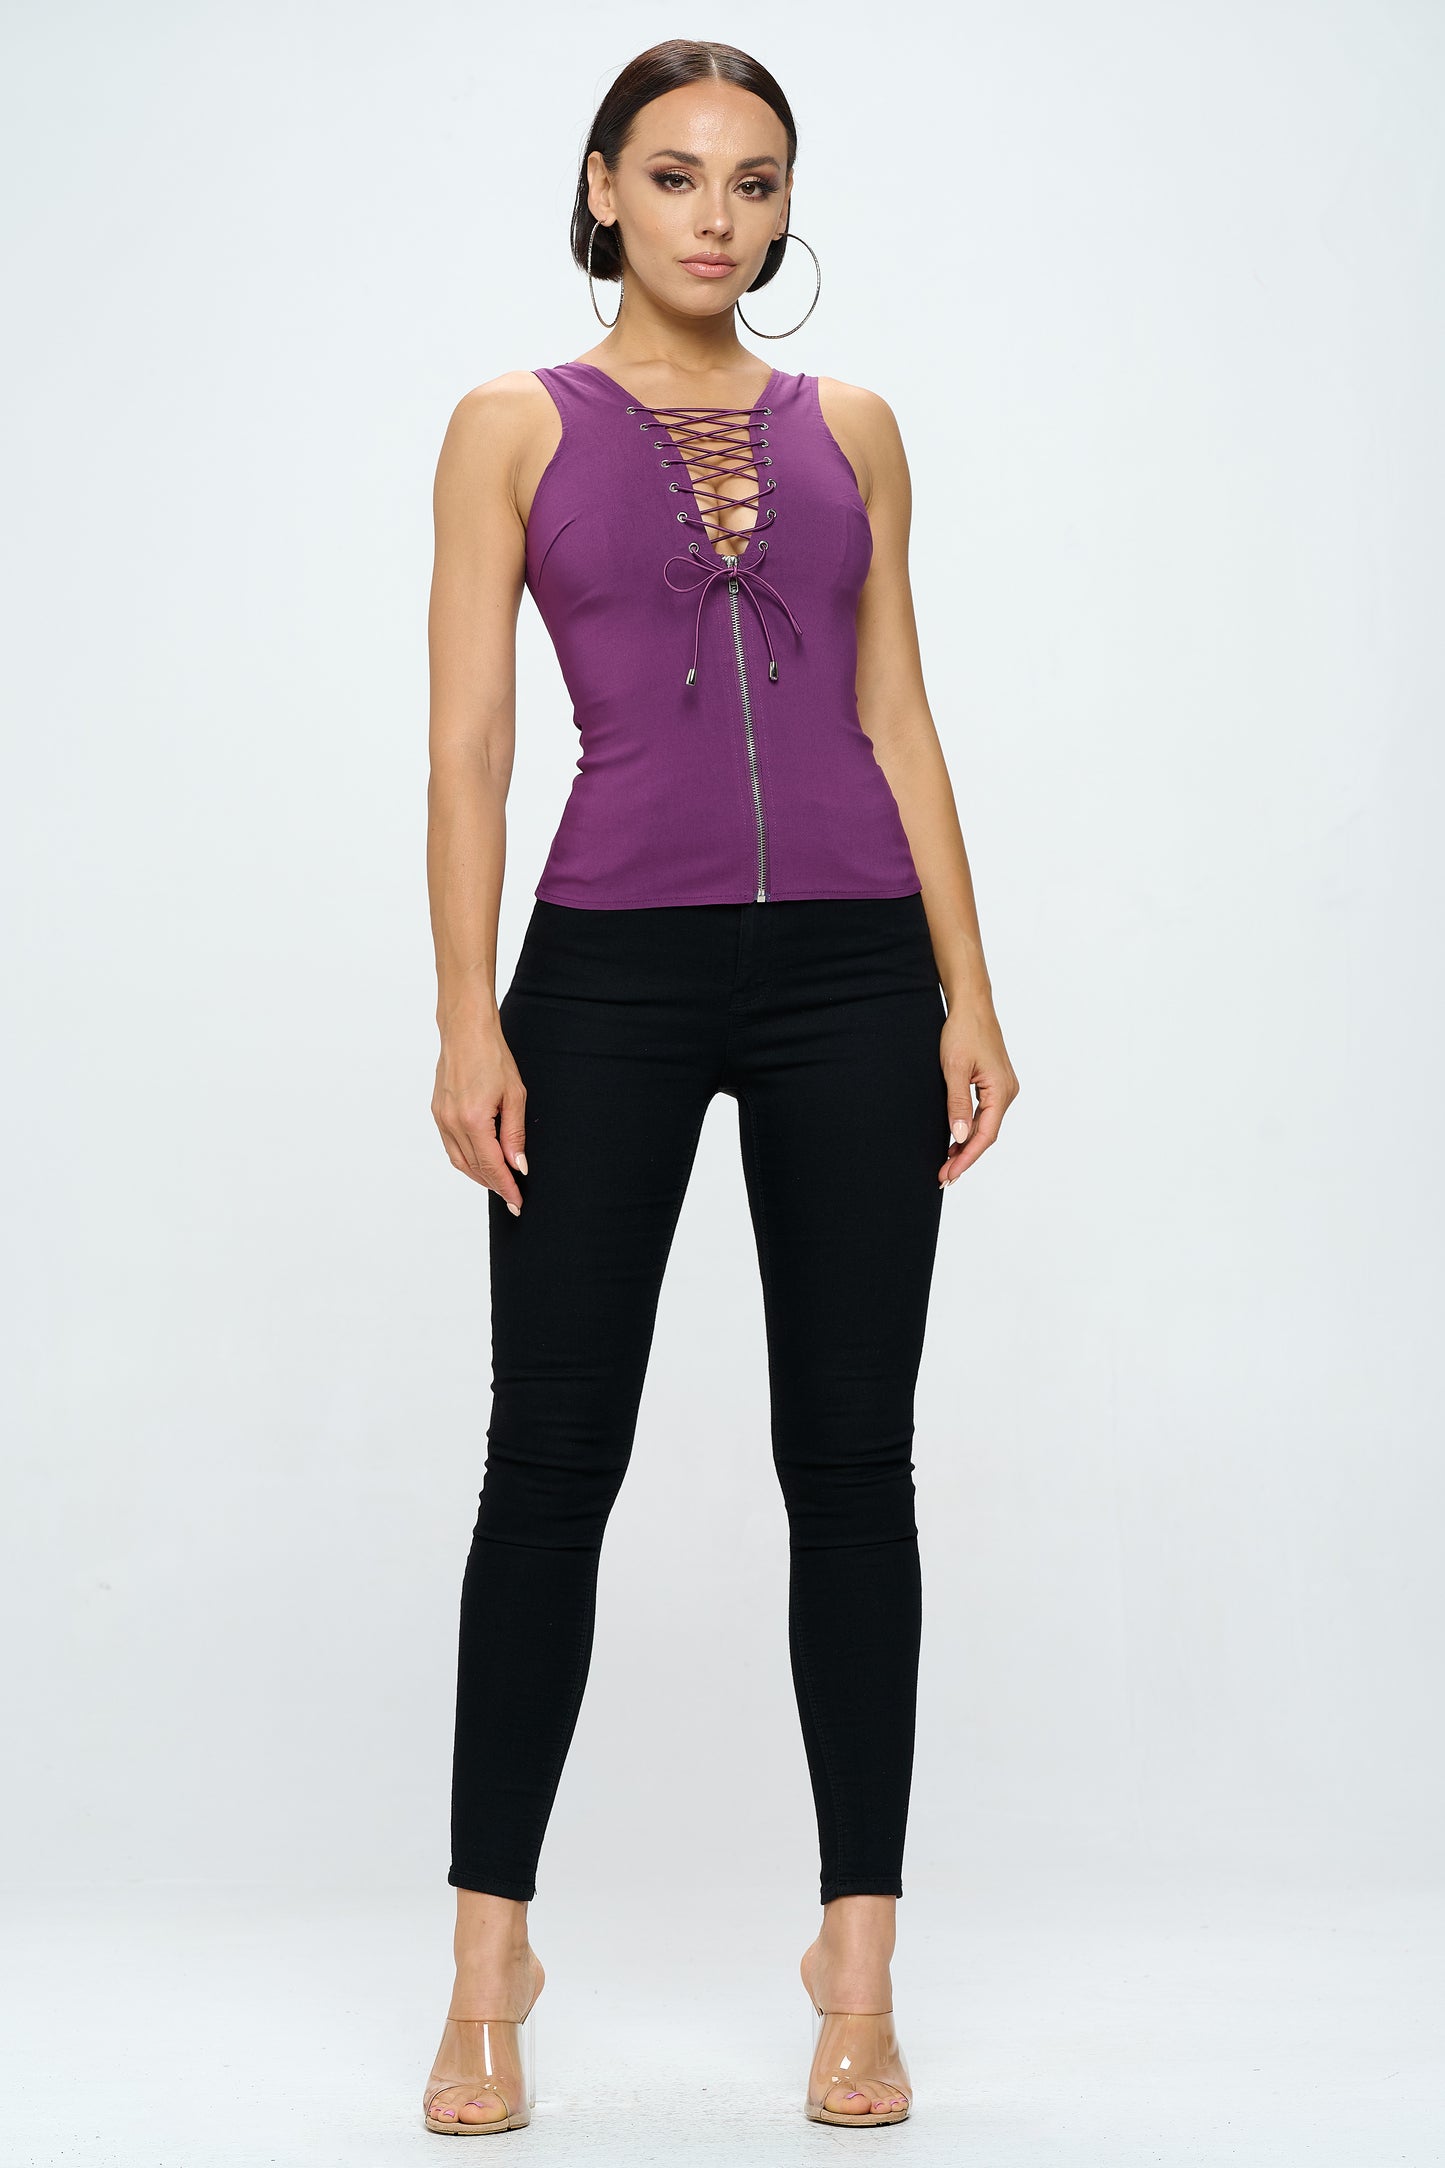 LACE UP FRONT DETAIL CROSS HATCH BACK TANK TOP